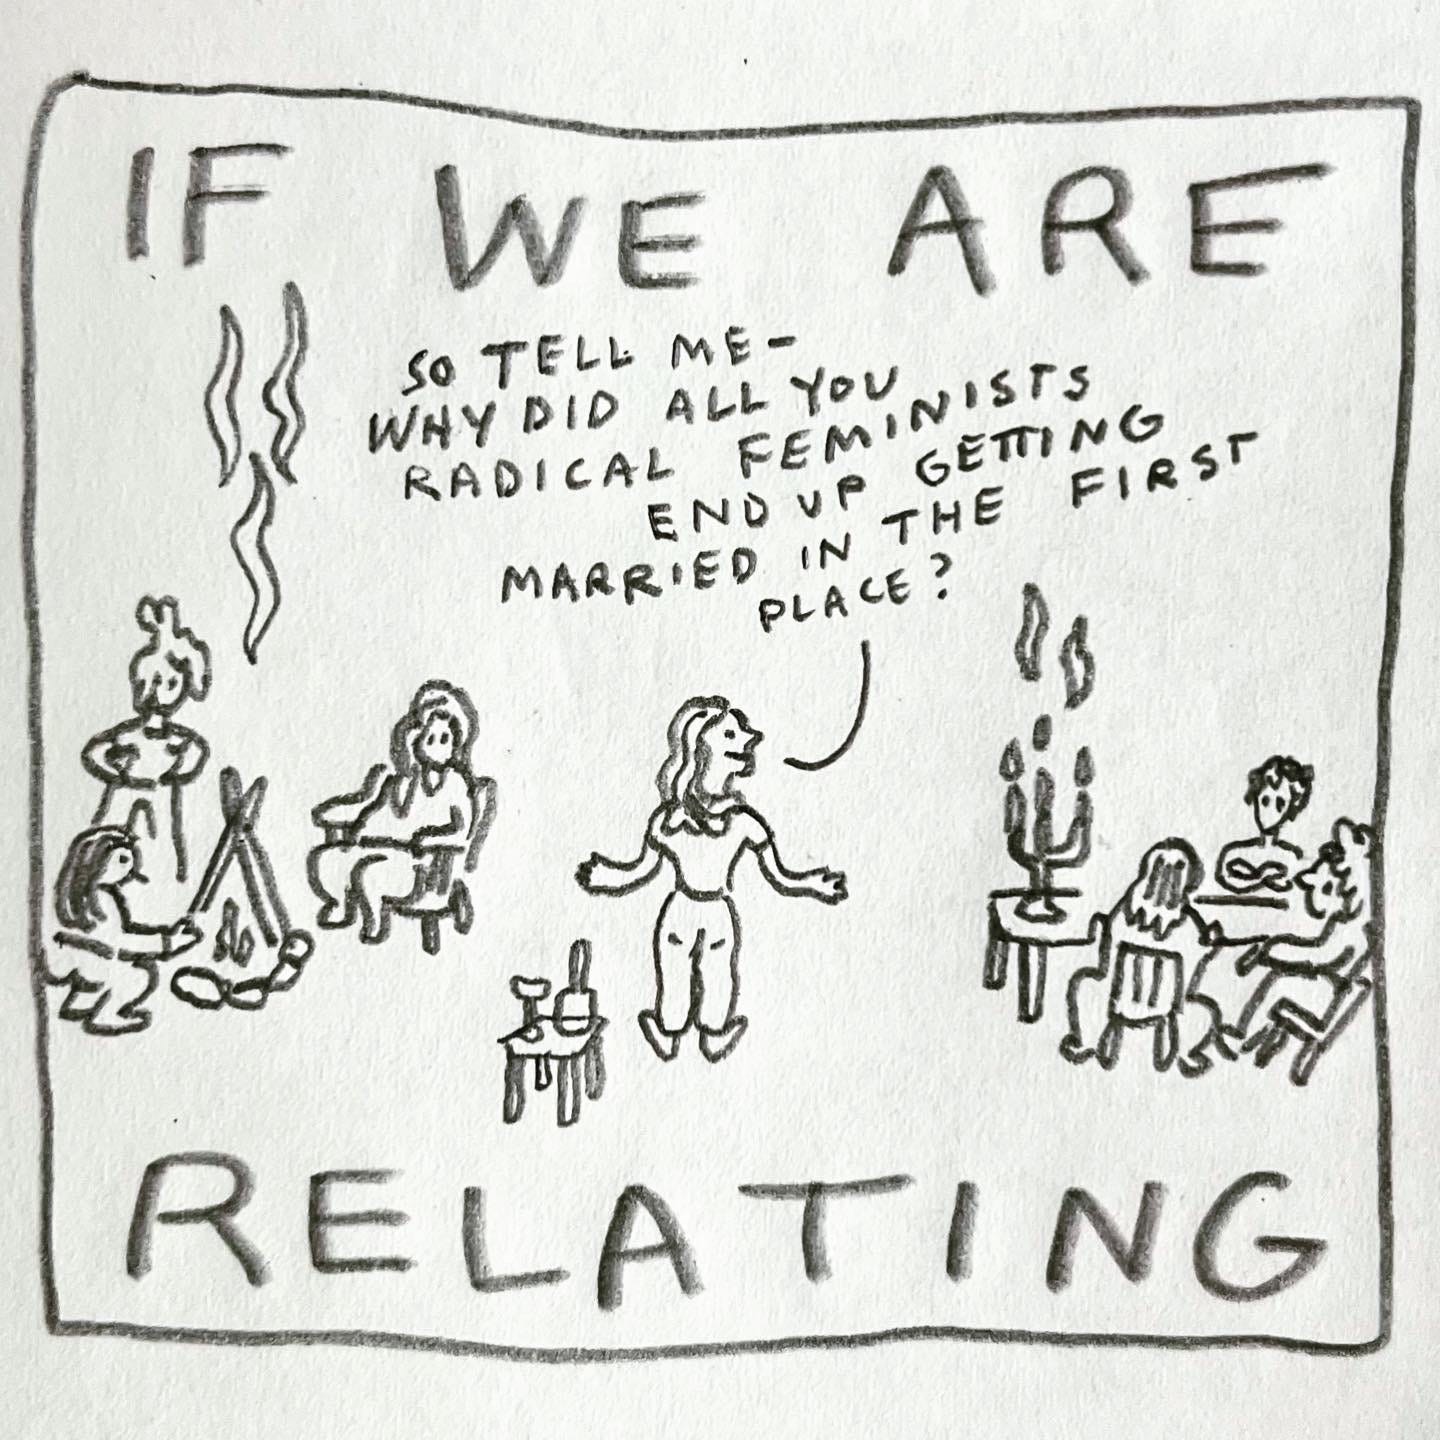 Panel 3: if we are relating Image: a woman stands in the center holding out her arms. She addresses the people gathered, three of them around a campfire, three of them around a table bearing a lit candelabra. A small table with wine is behind the standing woman. She asks, “So tell me - why did all you radical feminists end up getting married in the first place?"